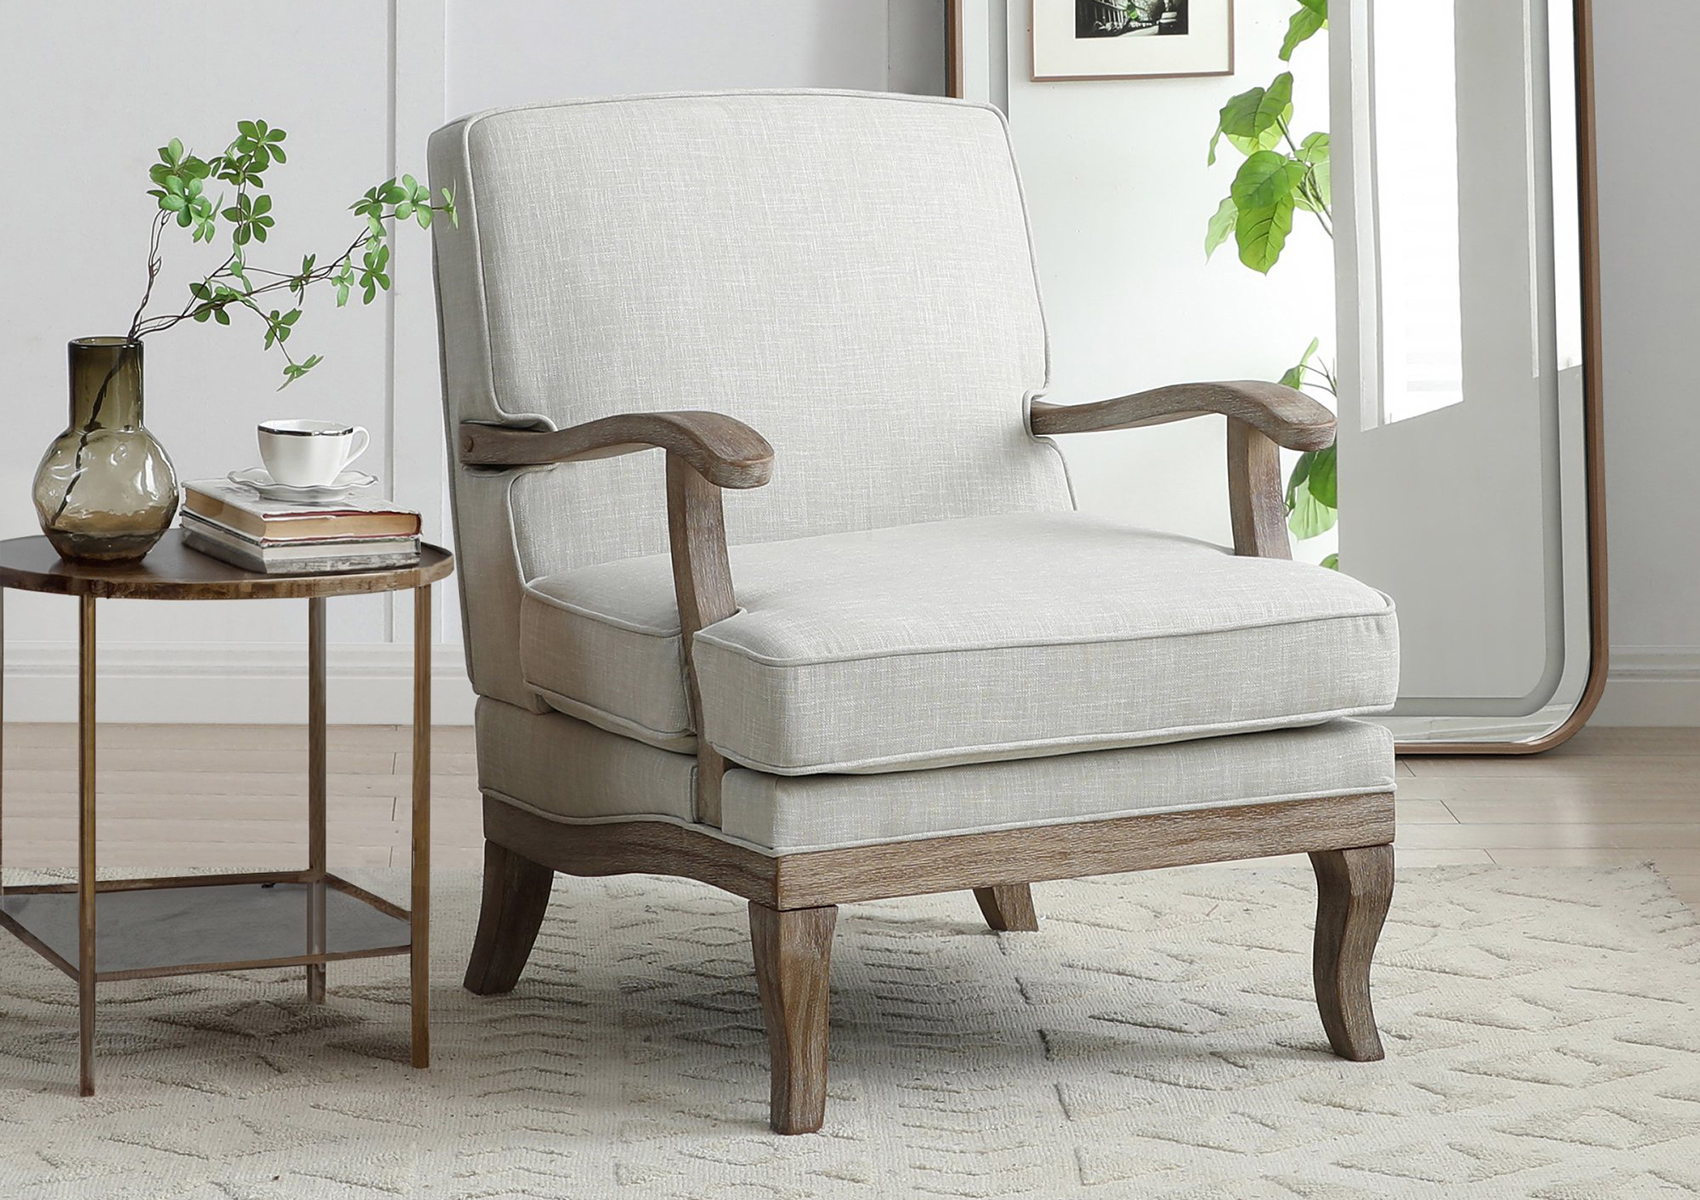 View Parma Natural Cream Chair Time4Sleep information